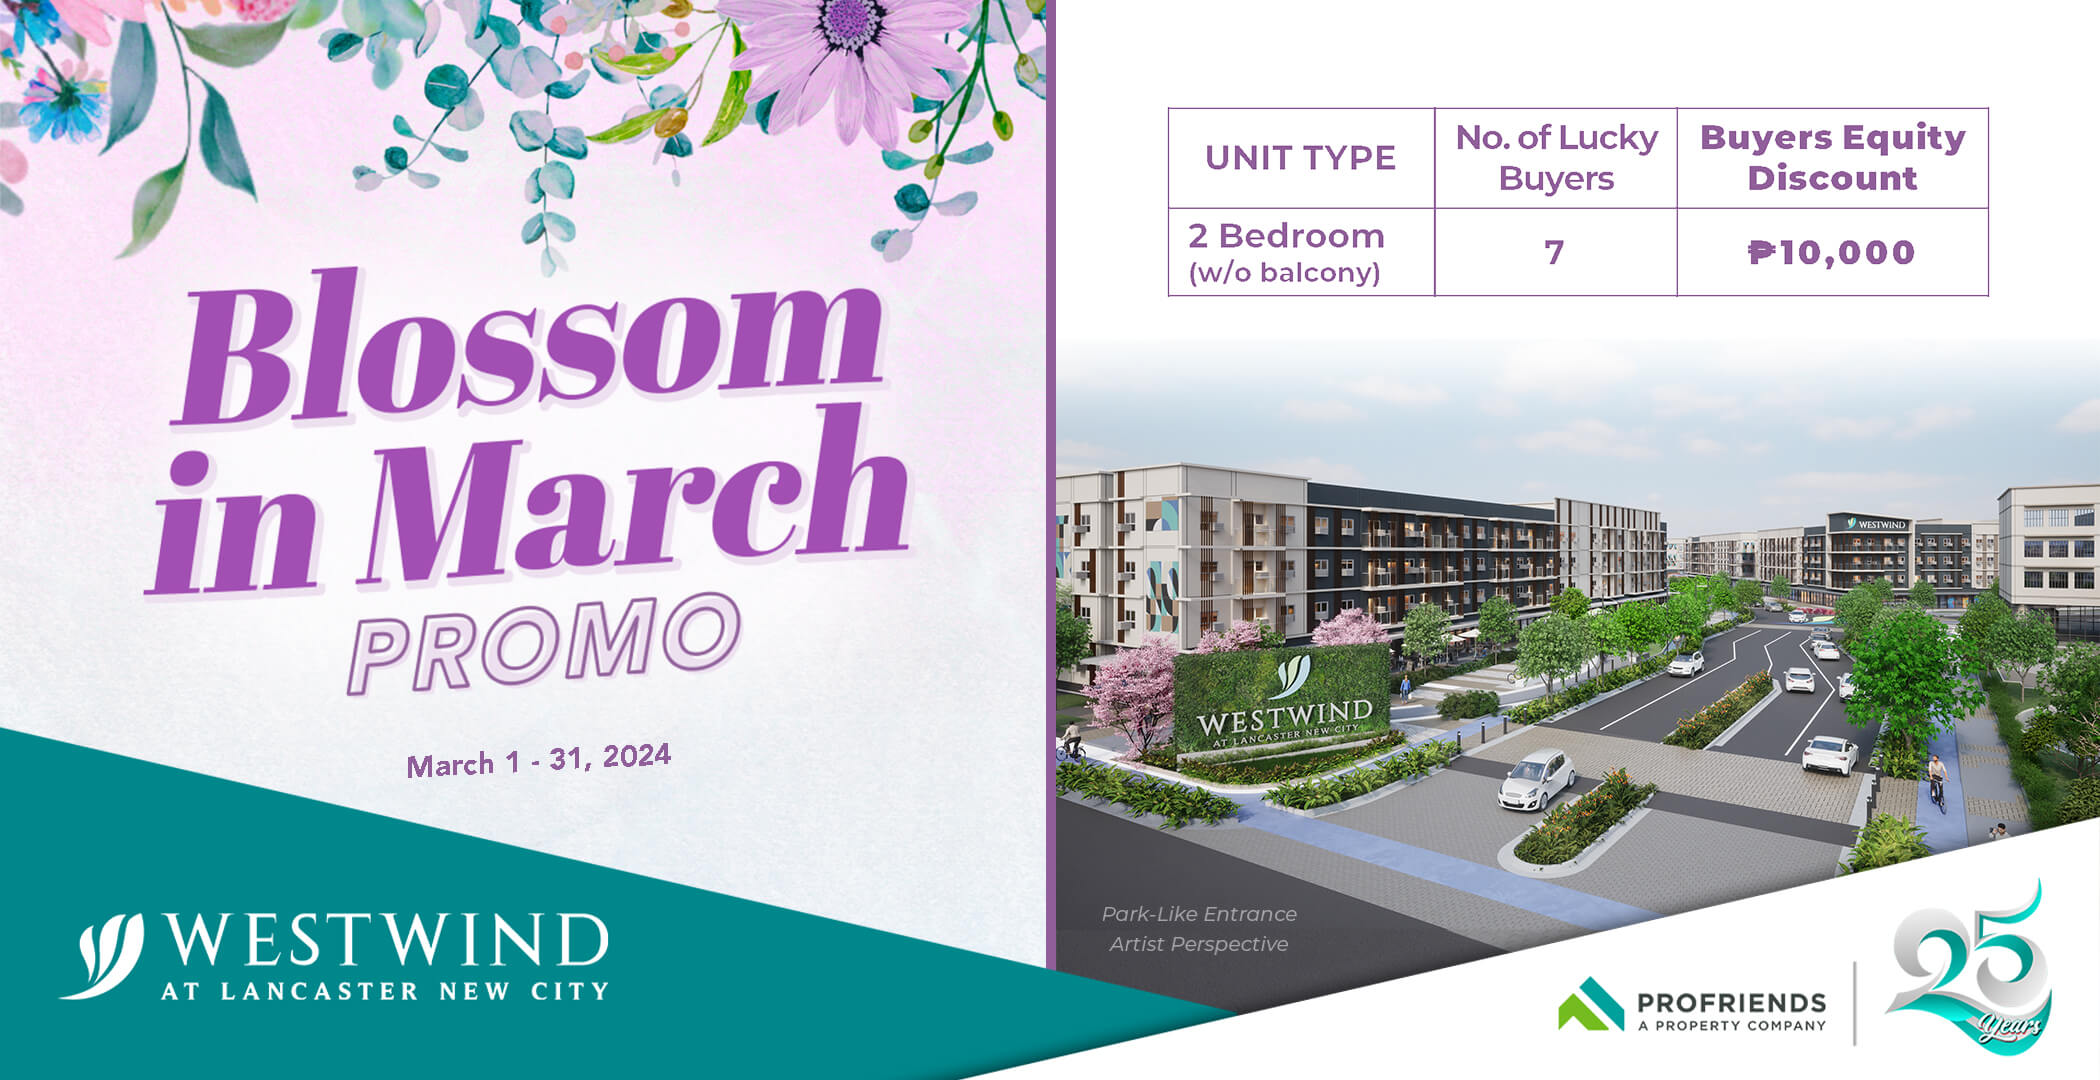 2 Bedroom Unit Condo Promo at Westwind Cavite for March 1 to 31 2024